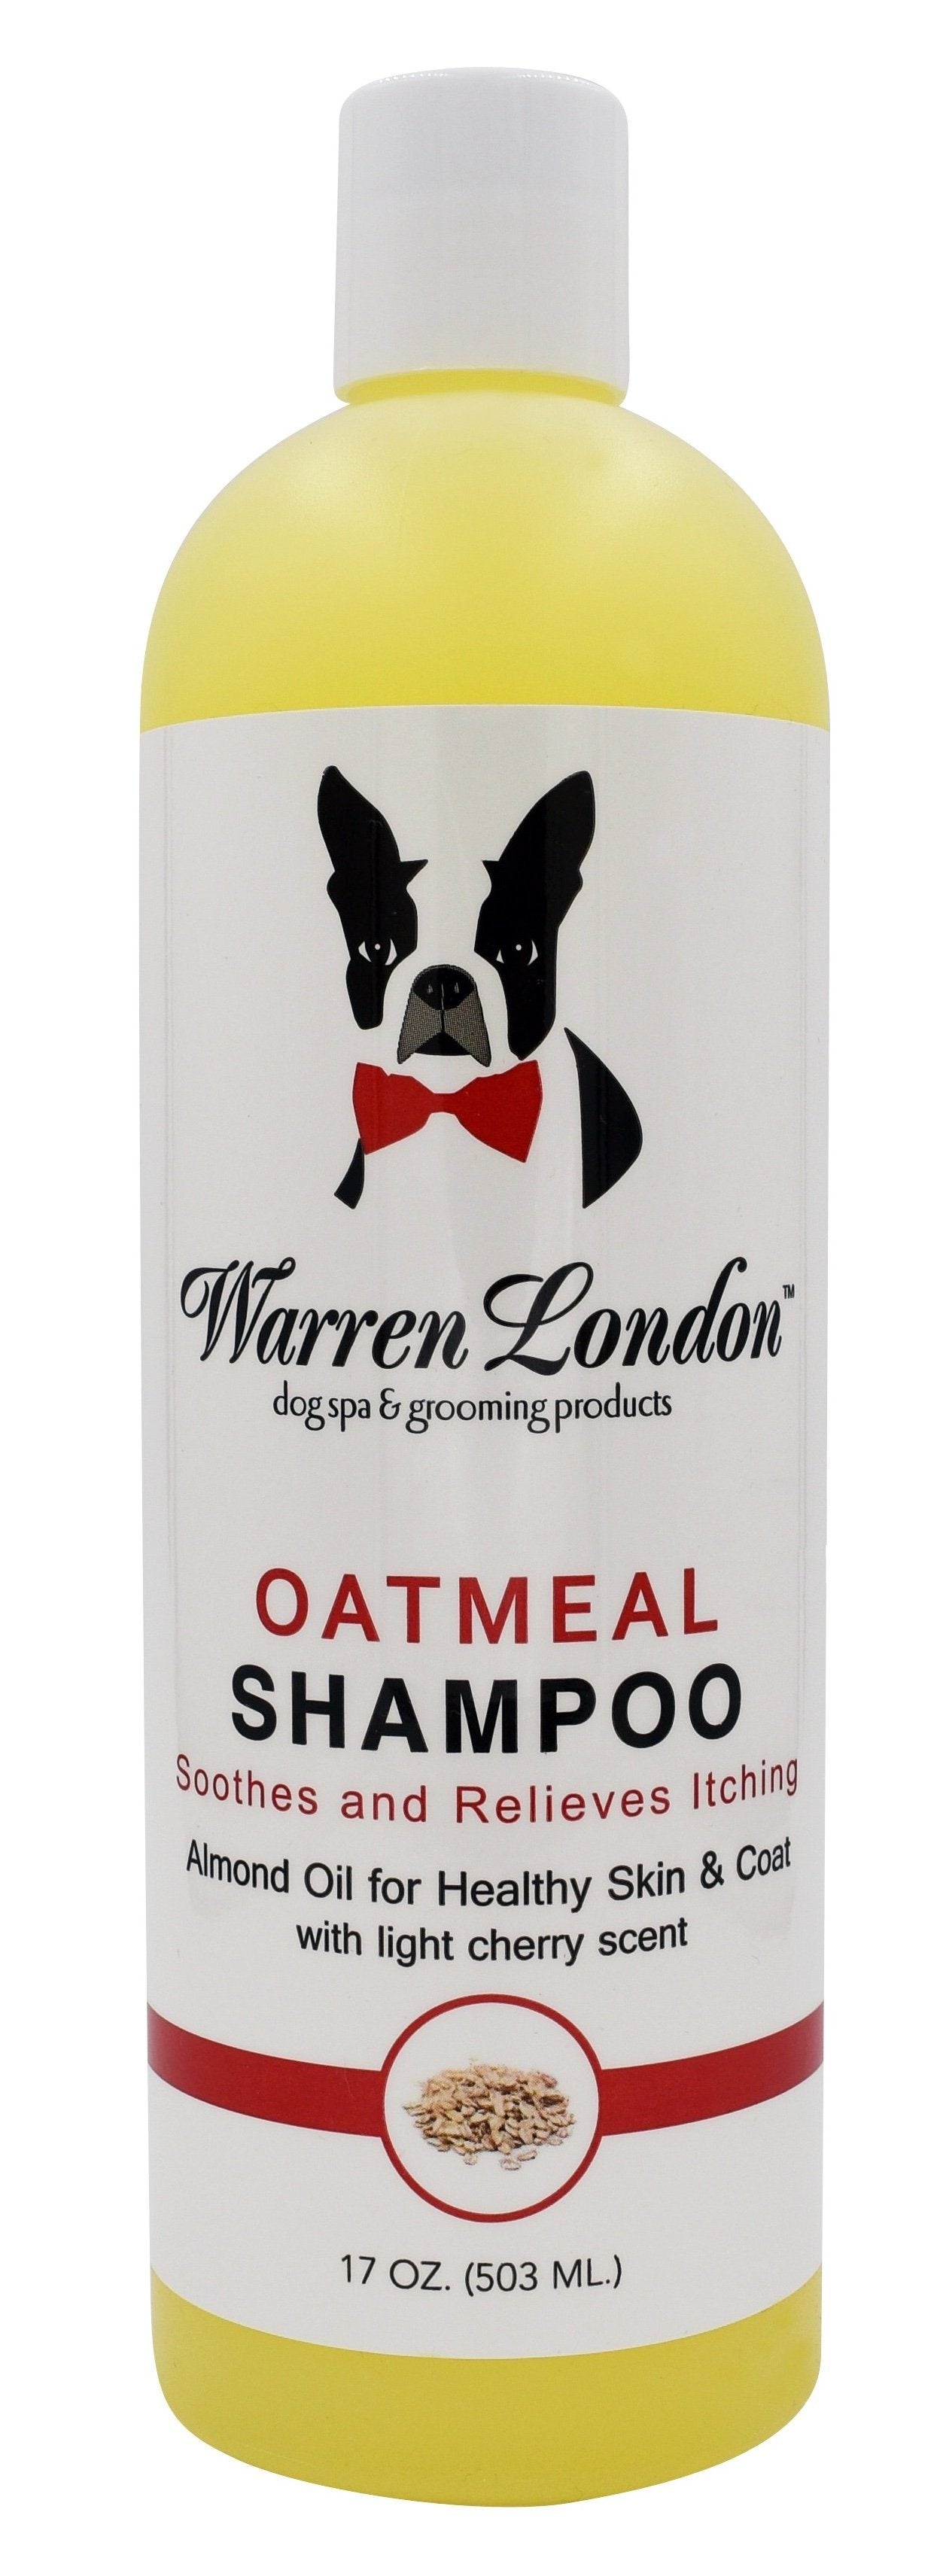 Oatmeal Shampoo - For Dogs With Itchy Skin and Coats - Cherry Scented Dog Shampoo Warren London 